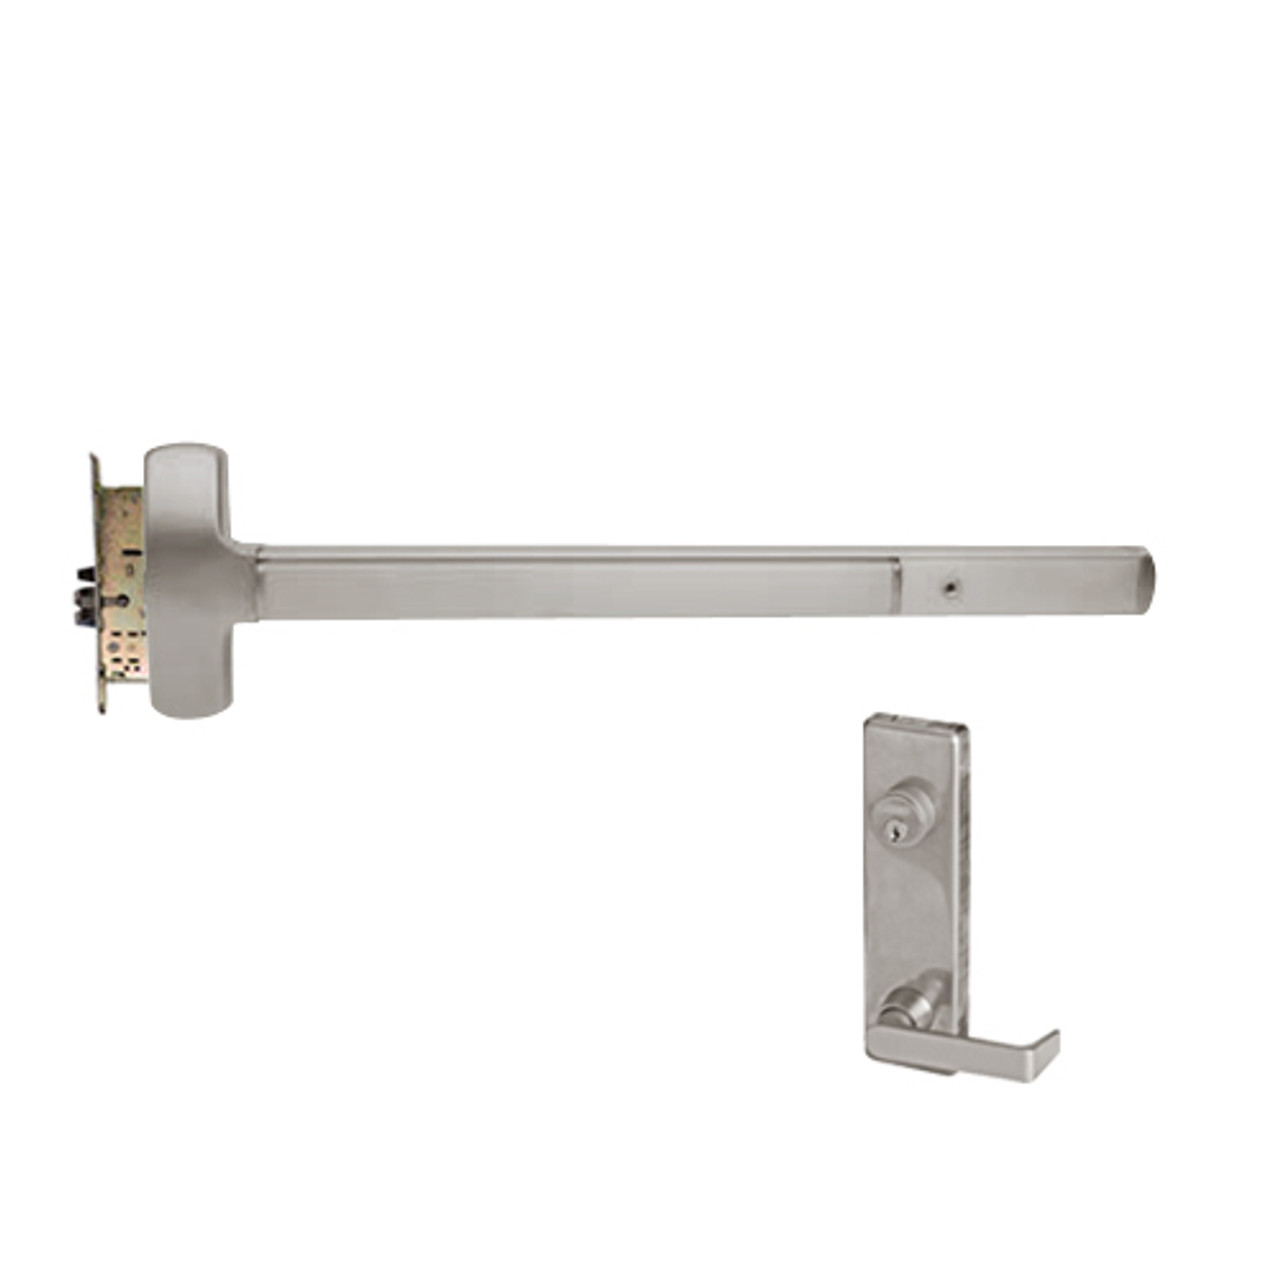 25-M-L-NL-DANE-US32D-3-RHR Falcon Exit Device in Satin Stainless Steel